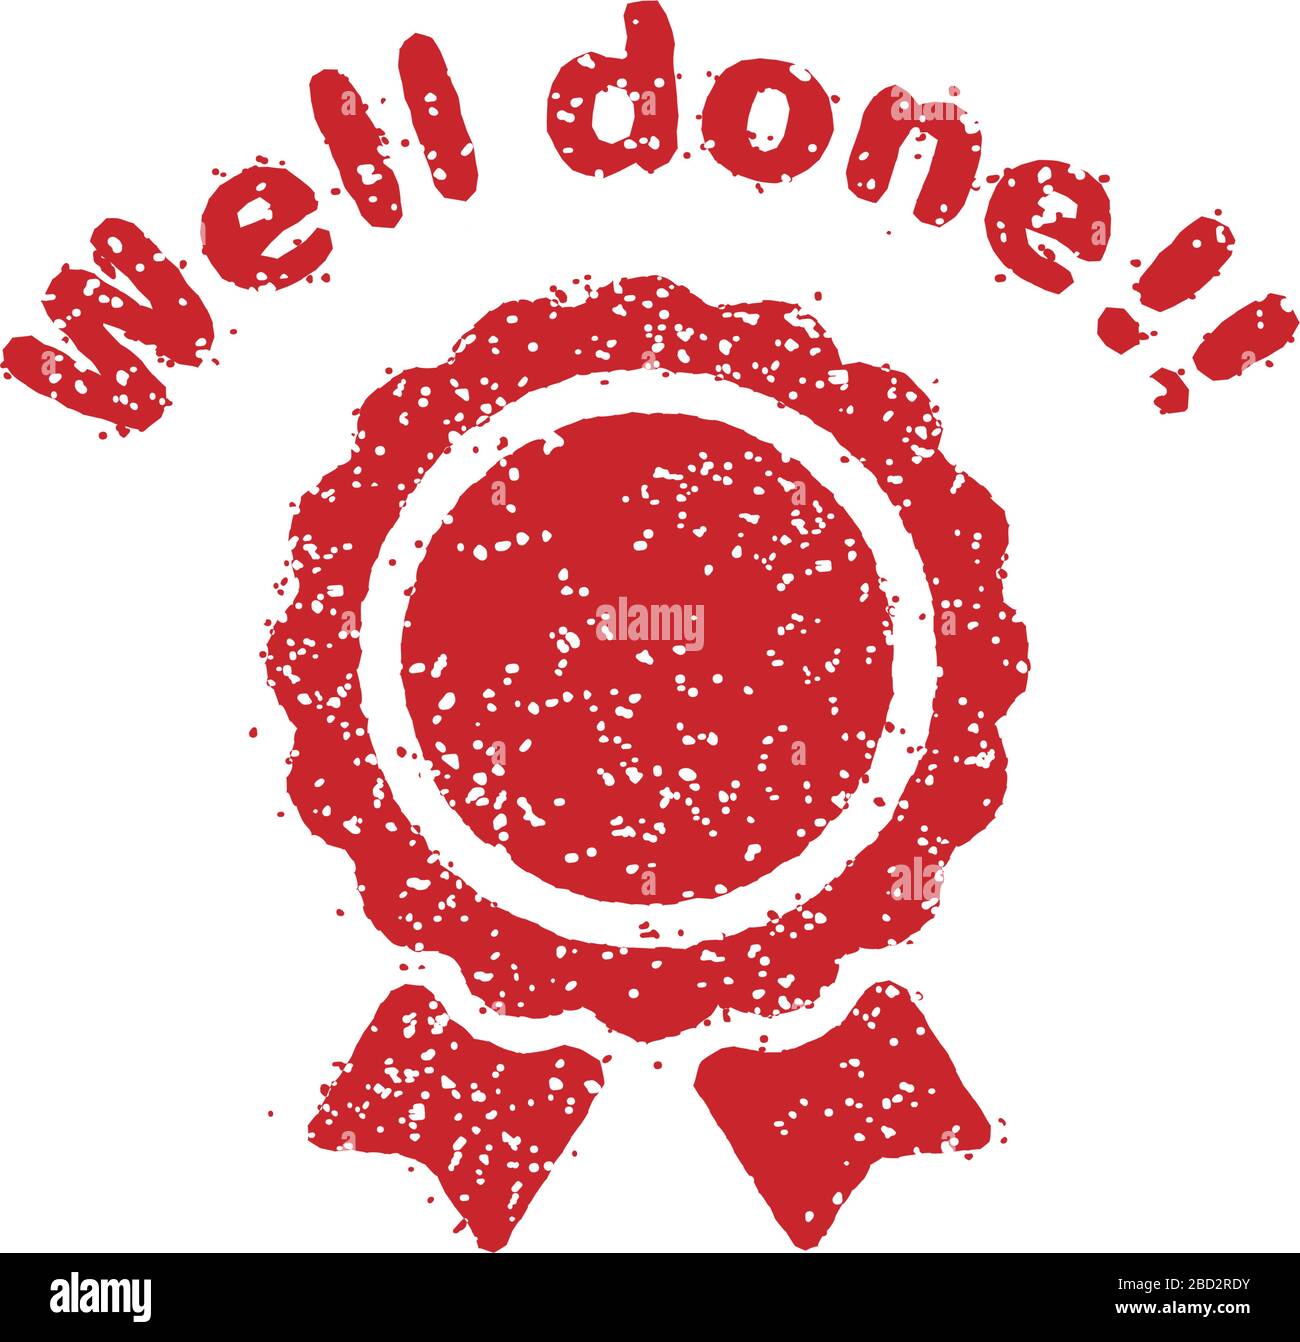 https://c8.alamy.com/comp/2BD2RDY/rubber-stamp-icon-for-teachers-using-at-school-well-done!!-2BD2RDY.jpg